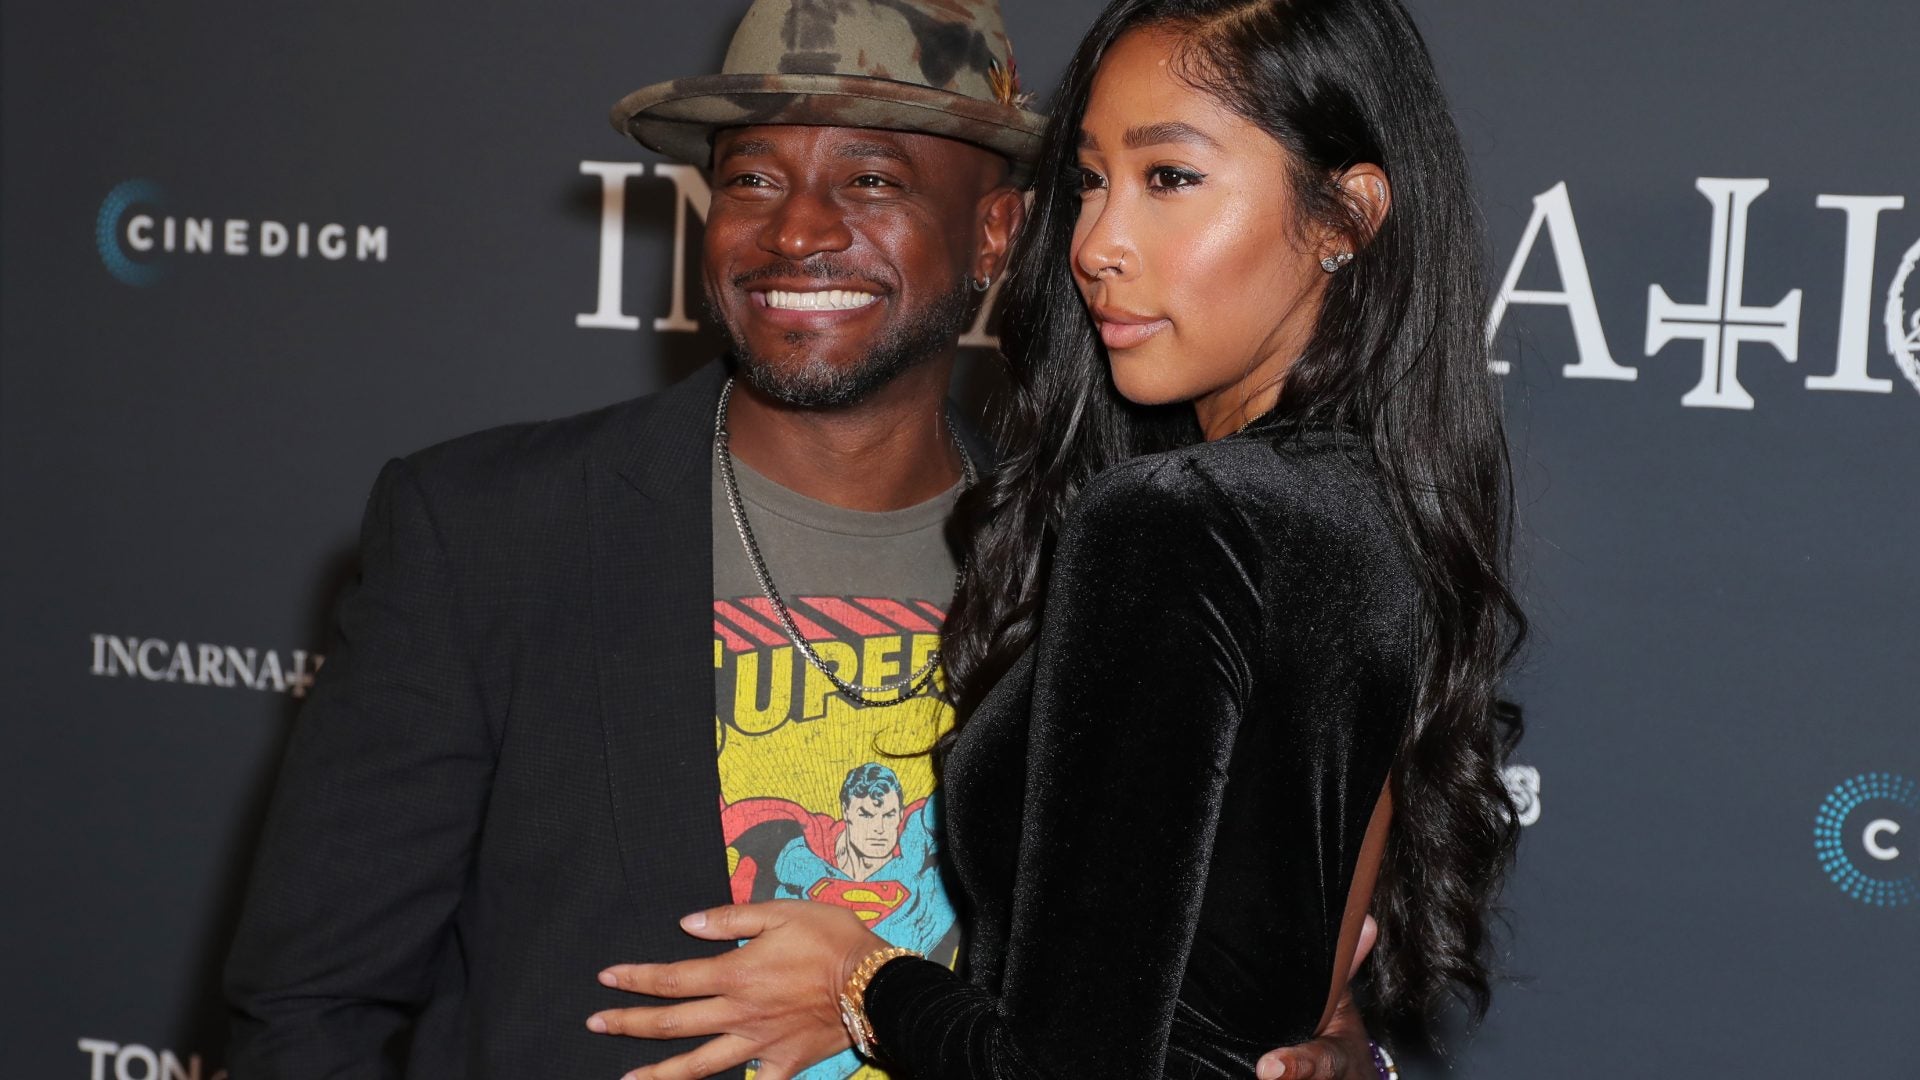 Taye Diggs And Apryl Jones Are The Hilarious Celeb Couple You Didn't Know You Needed In Your Feed